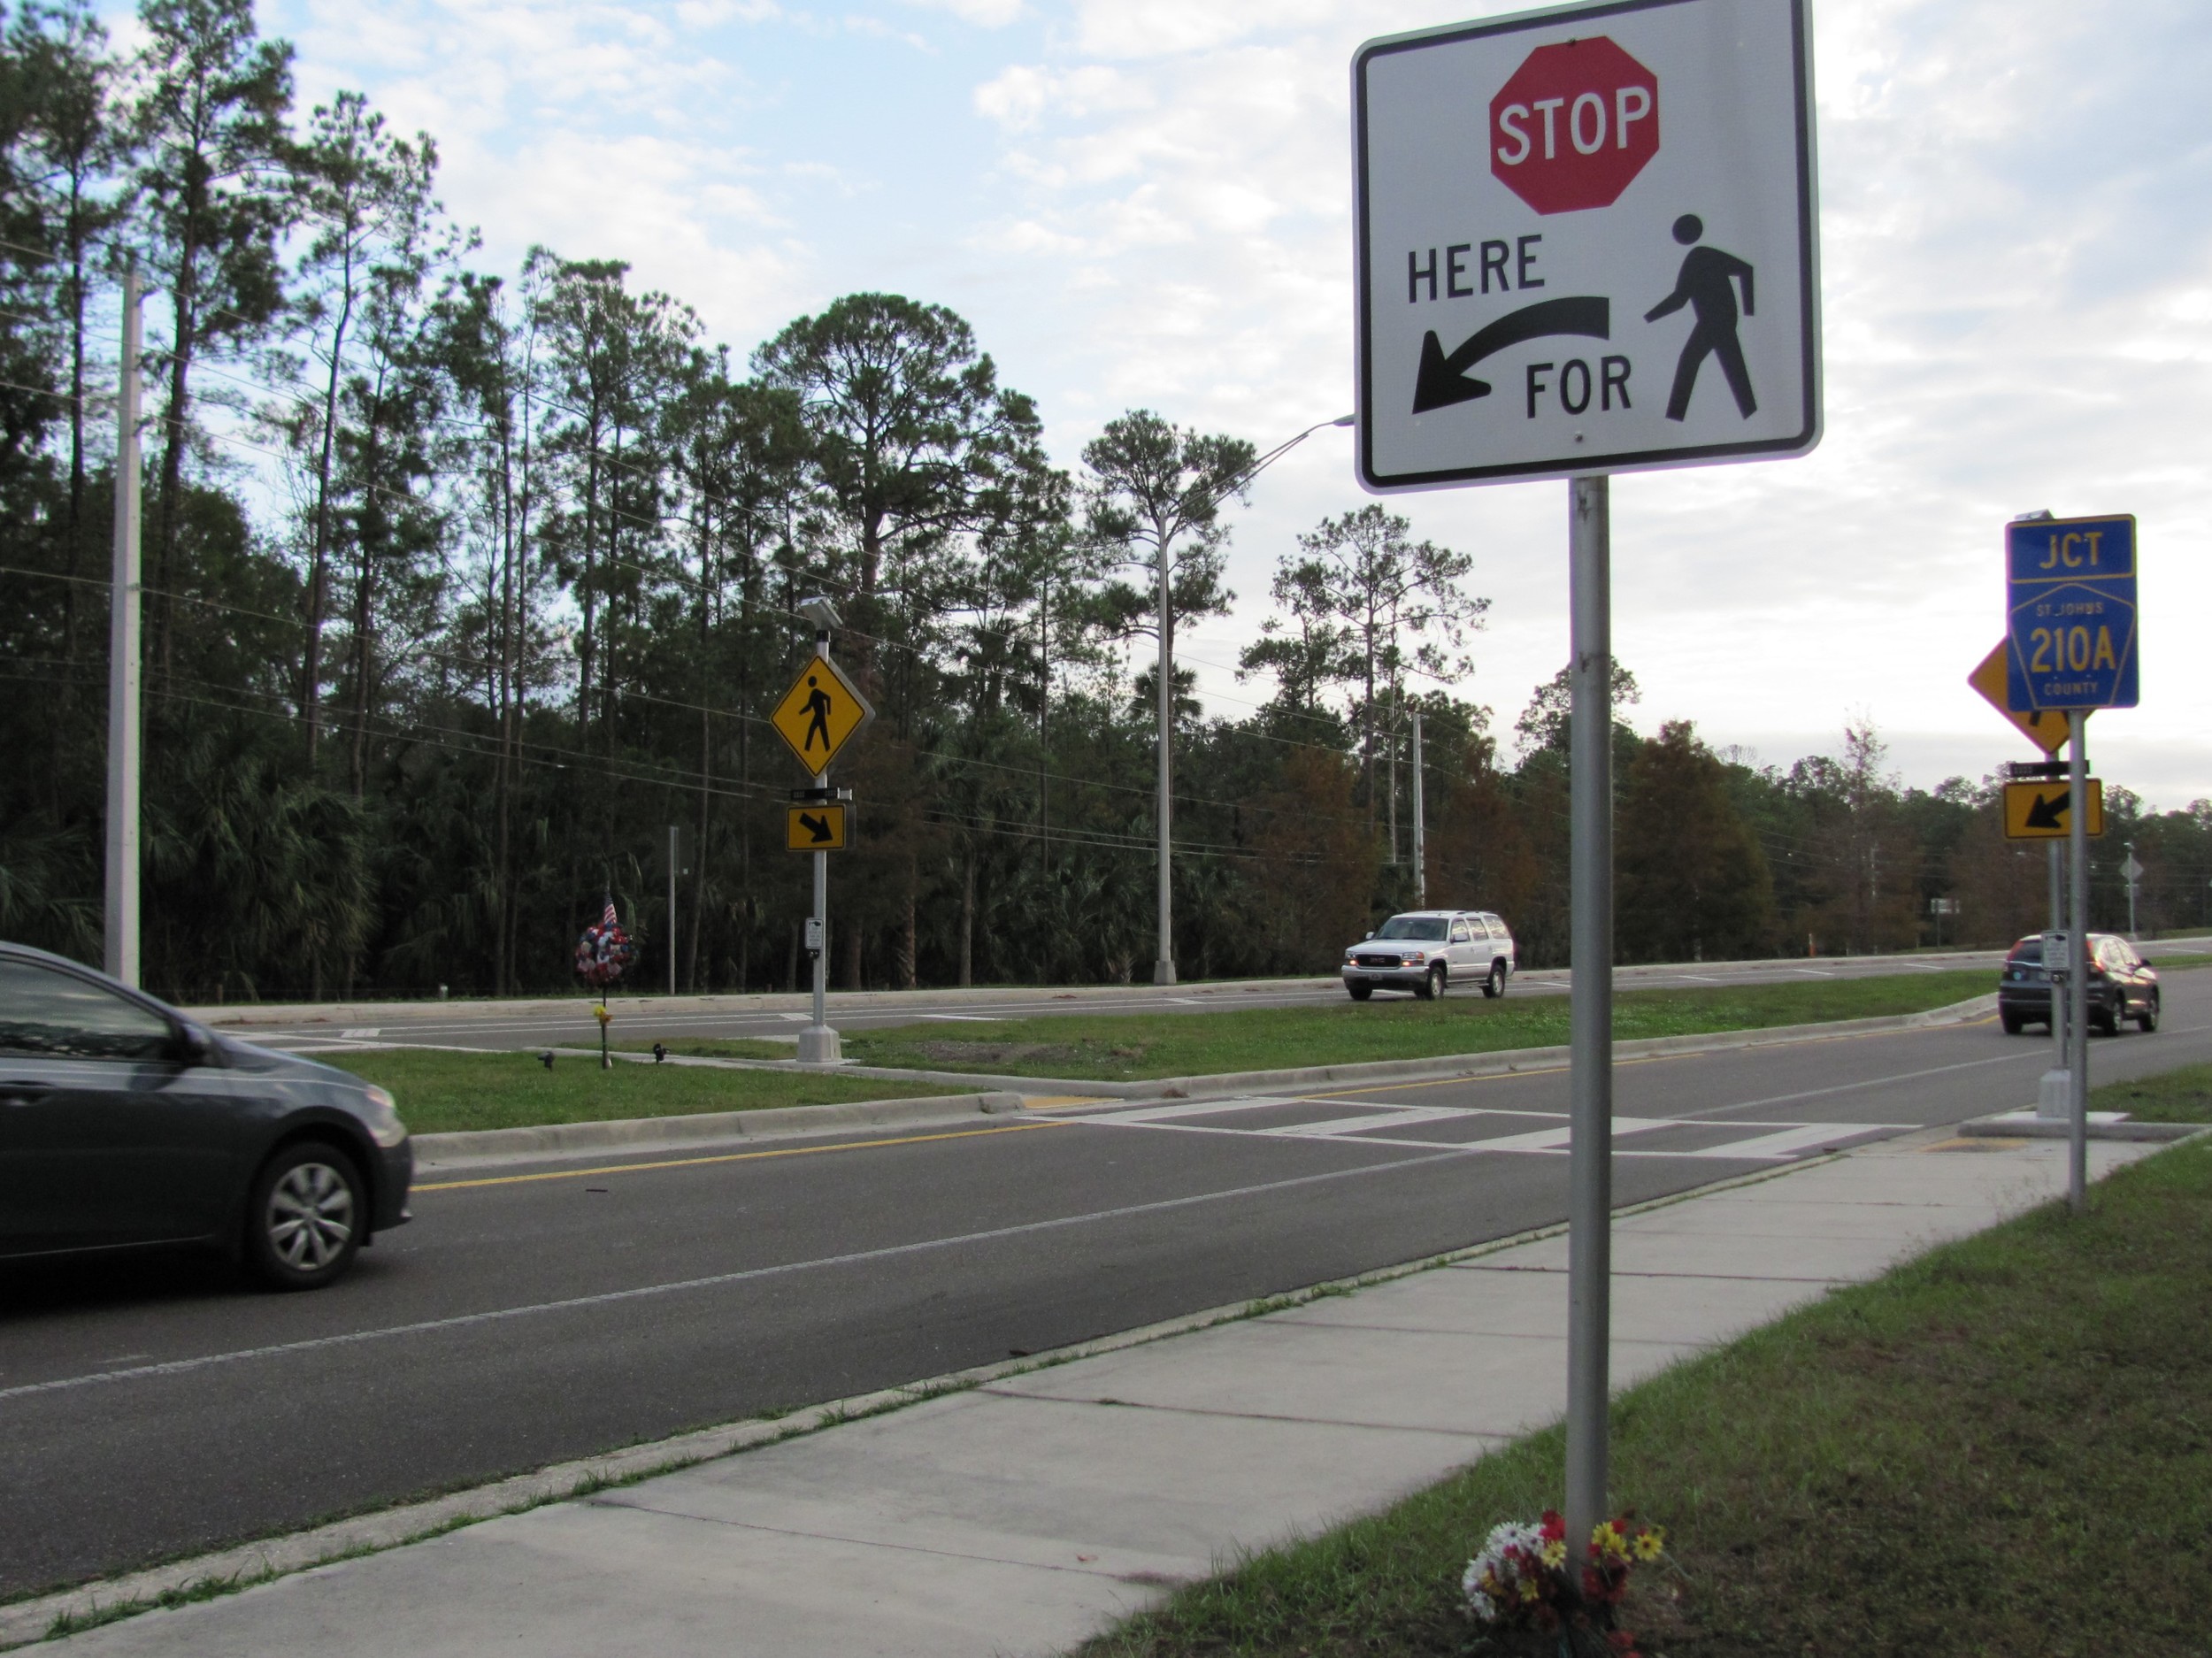 St. Johns County officials say the death of a 17-year-old Nease high school student in July influenced the county to implement the new flashing signals at the foot of the Palm Valley Bridge.